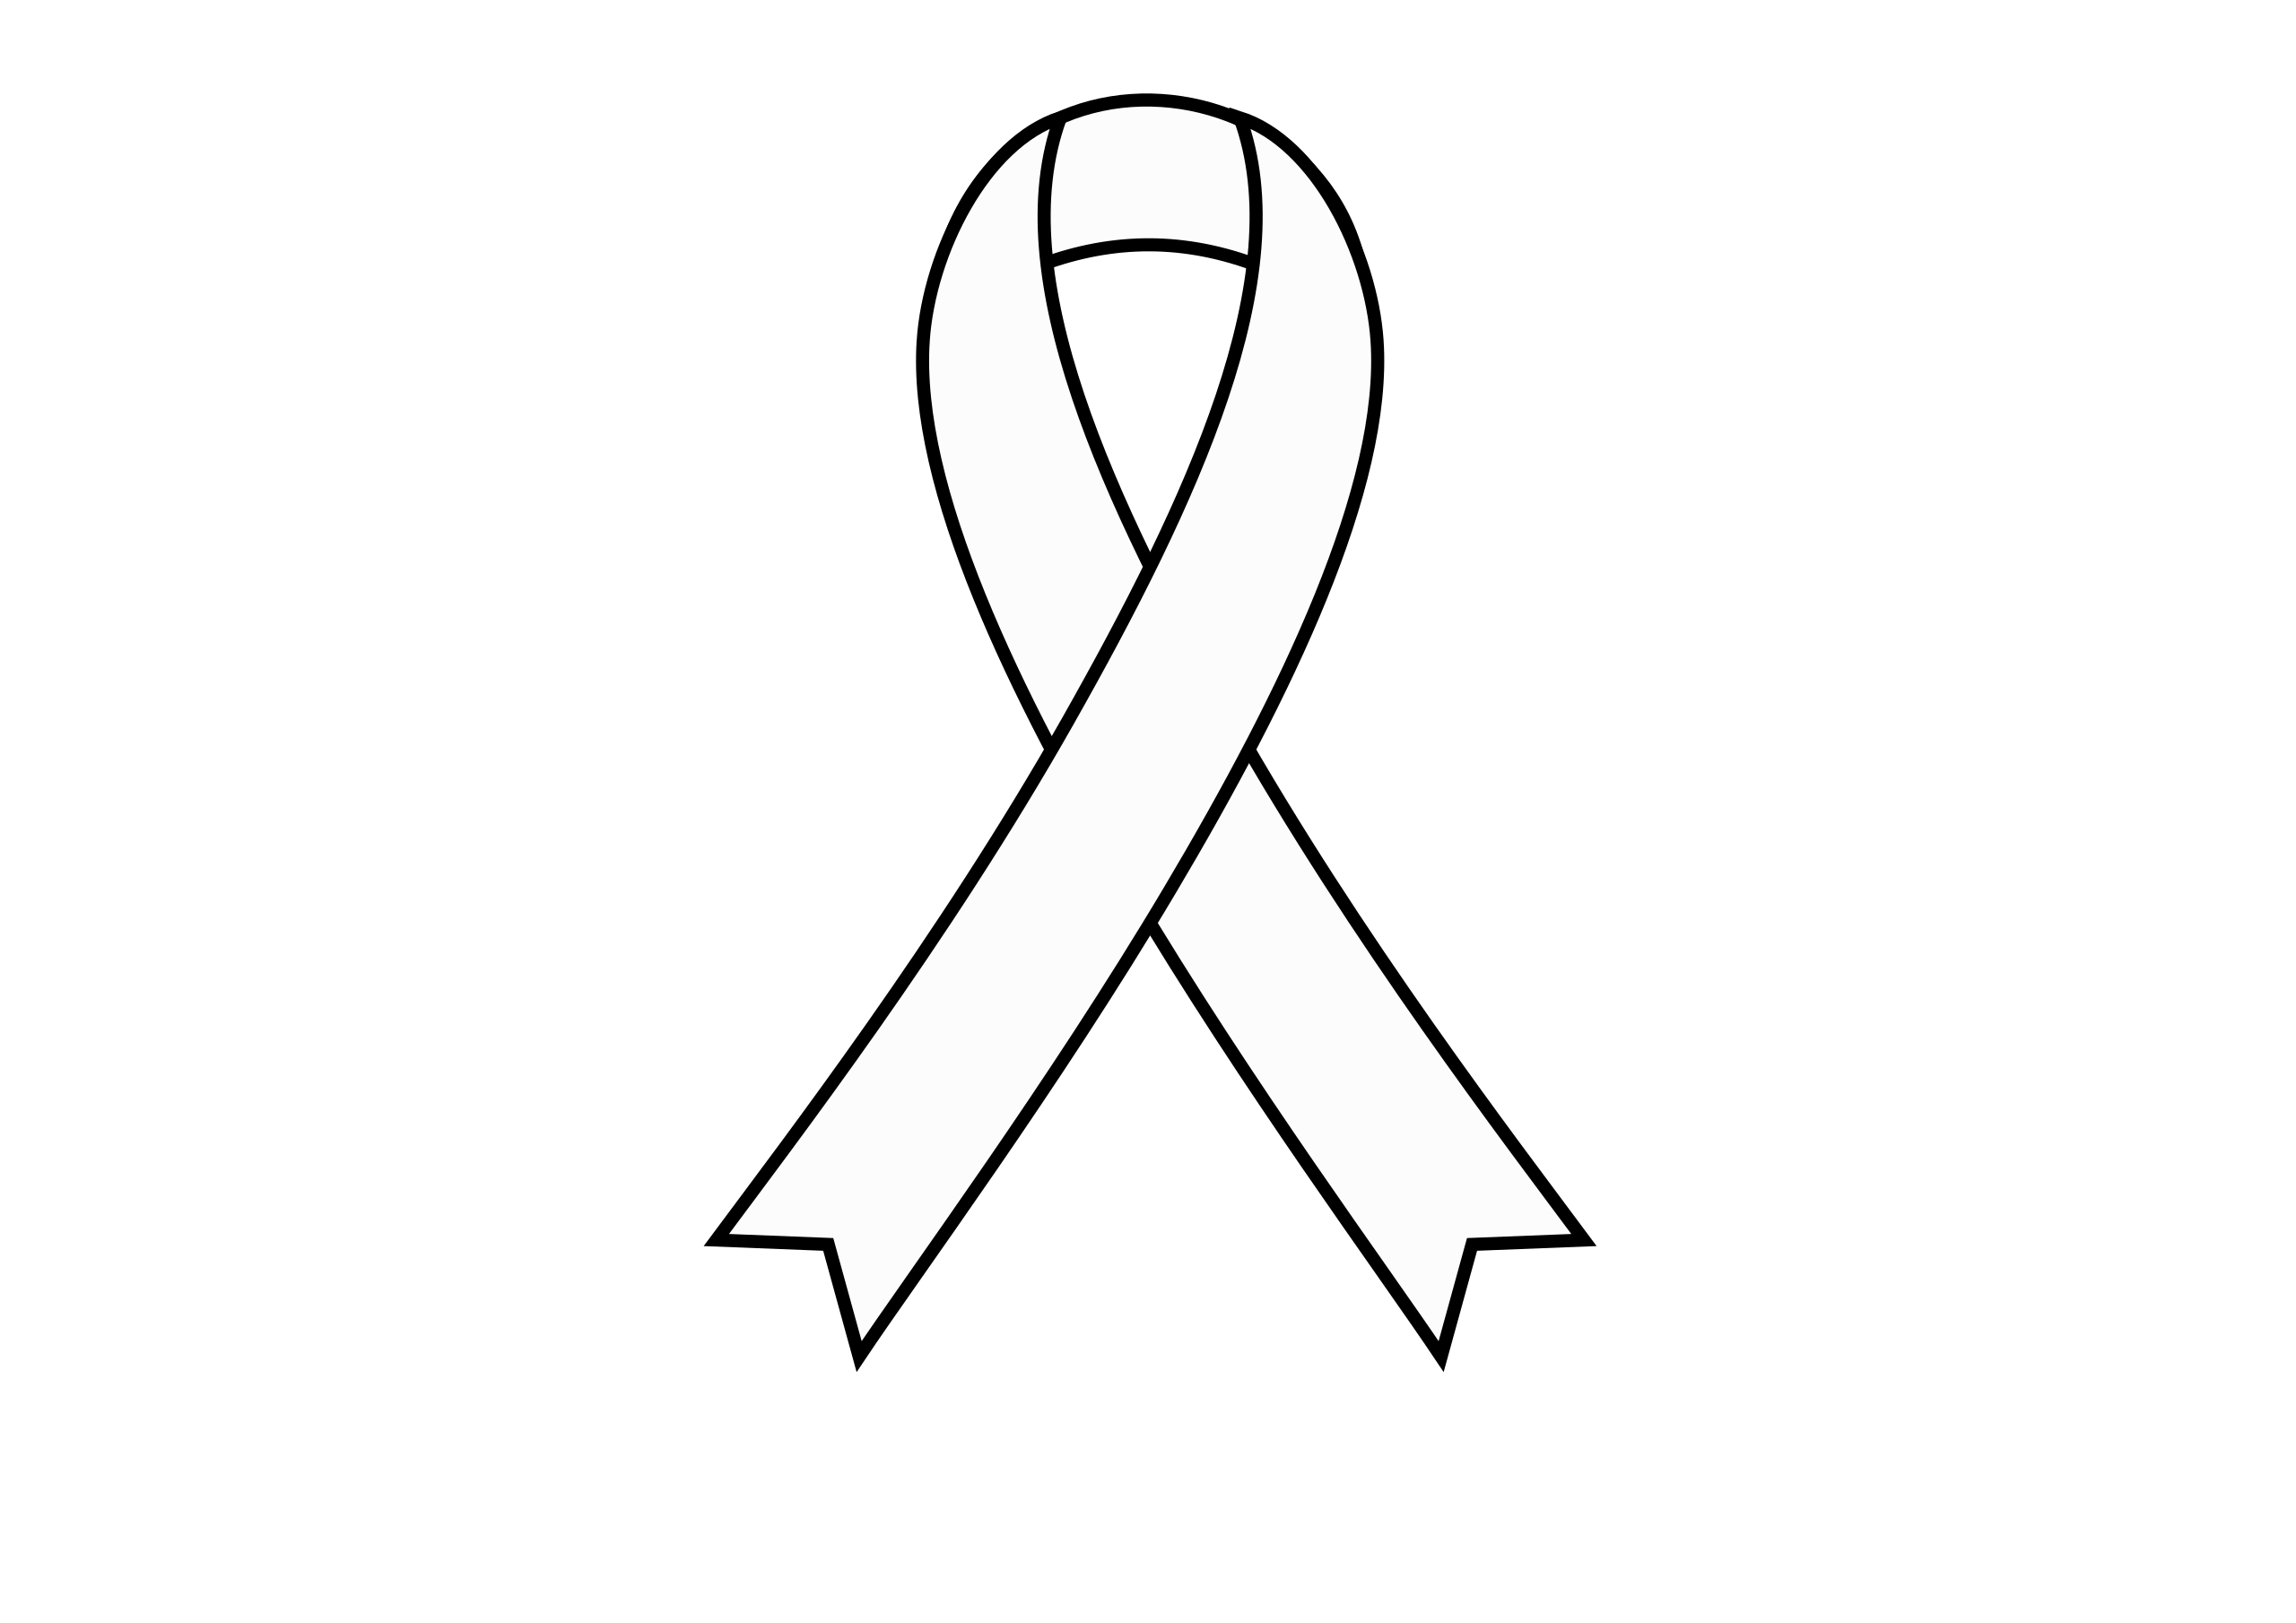 File:White awareness ribbon icon with outline.svg - Wikimedia Commons